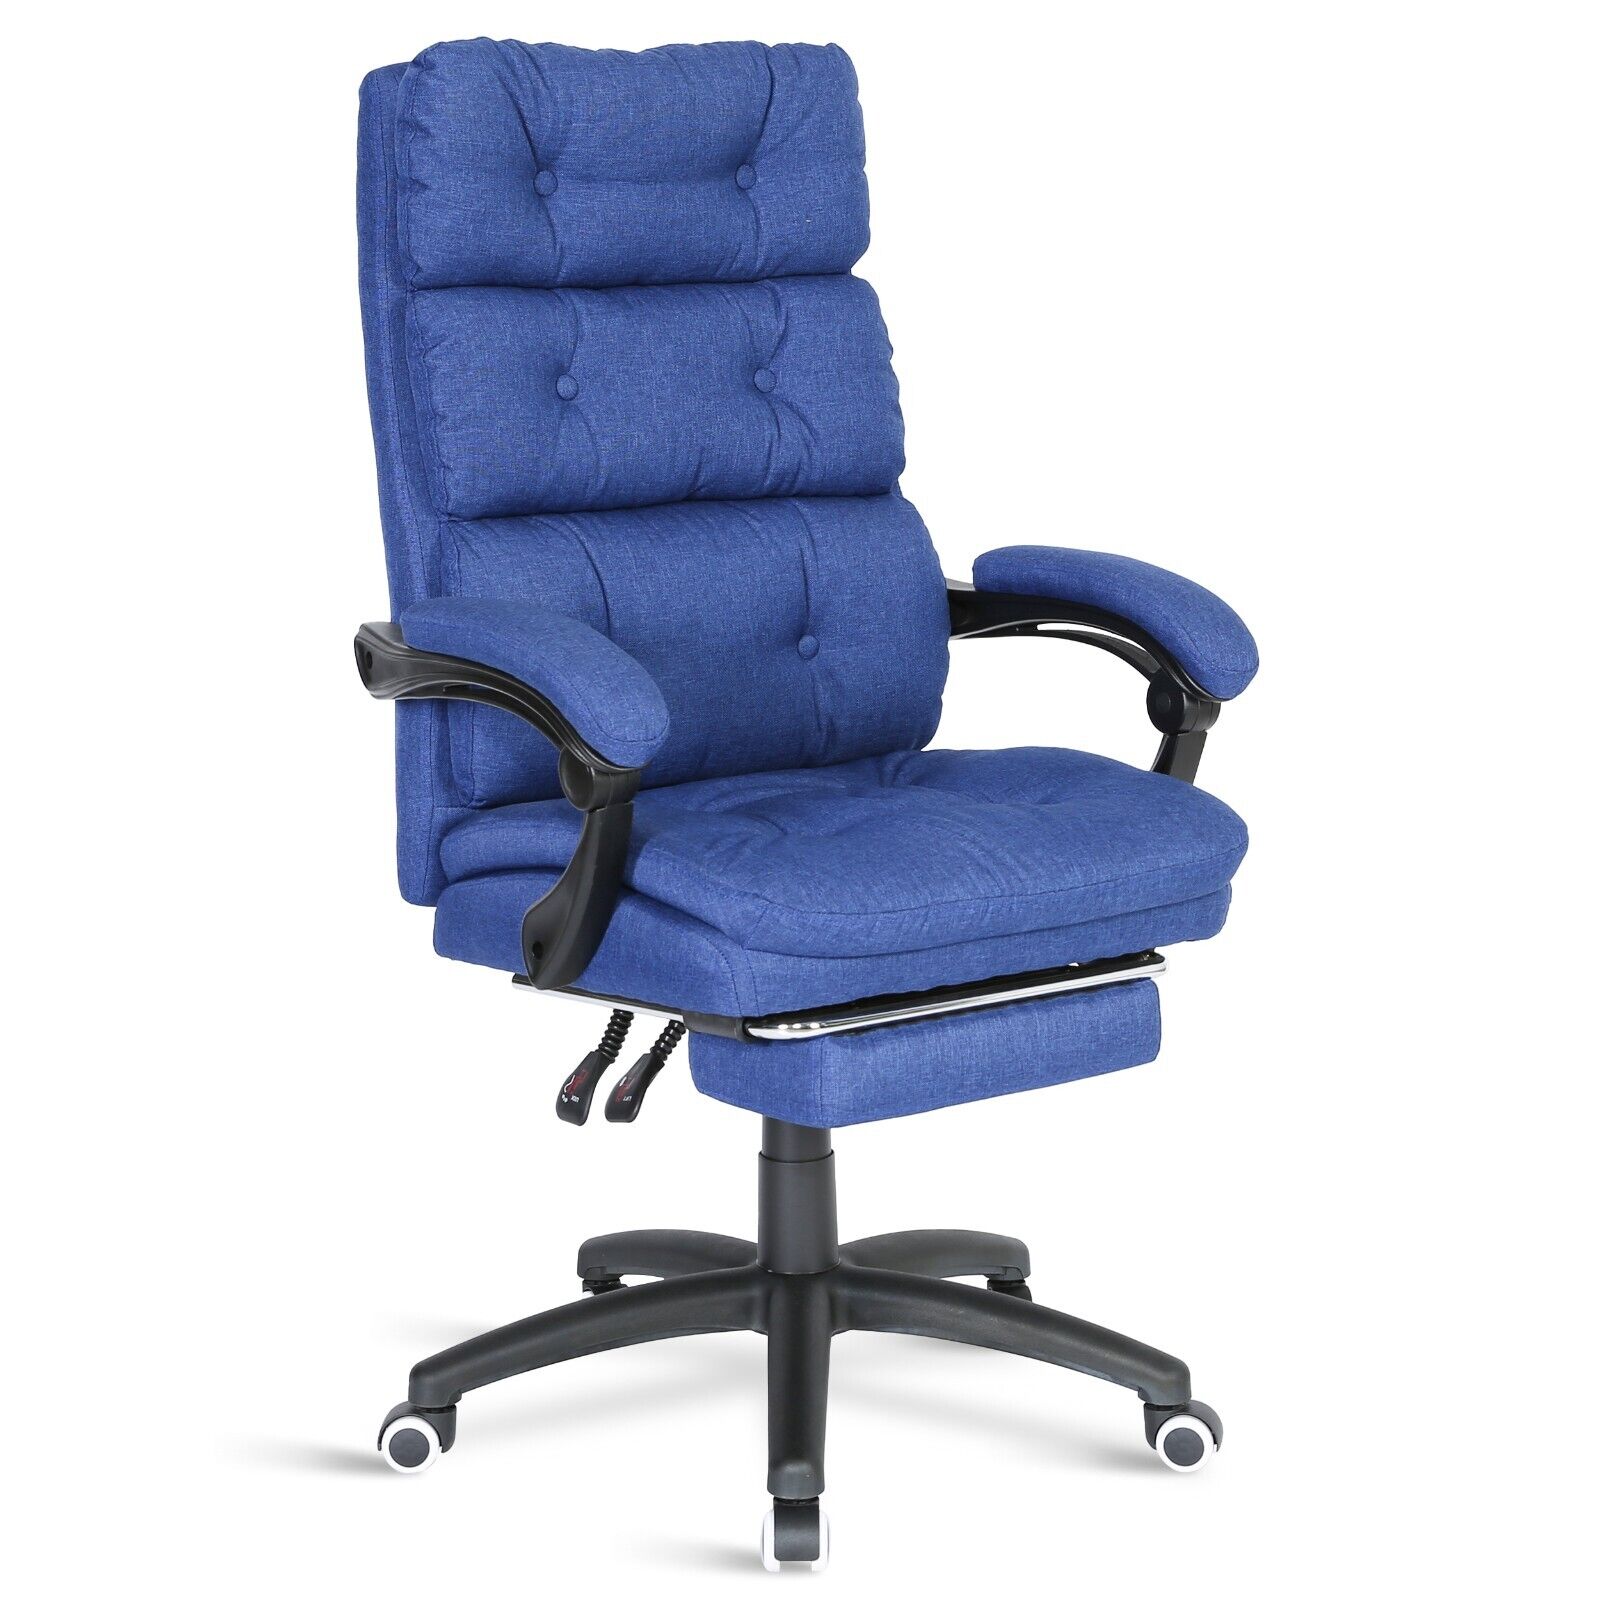 cheap office chairs